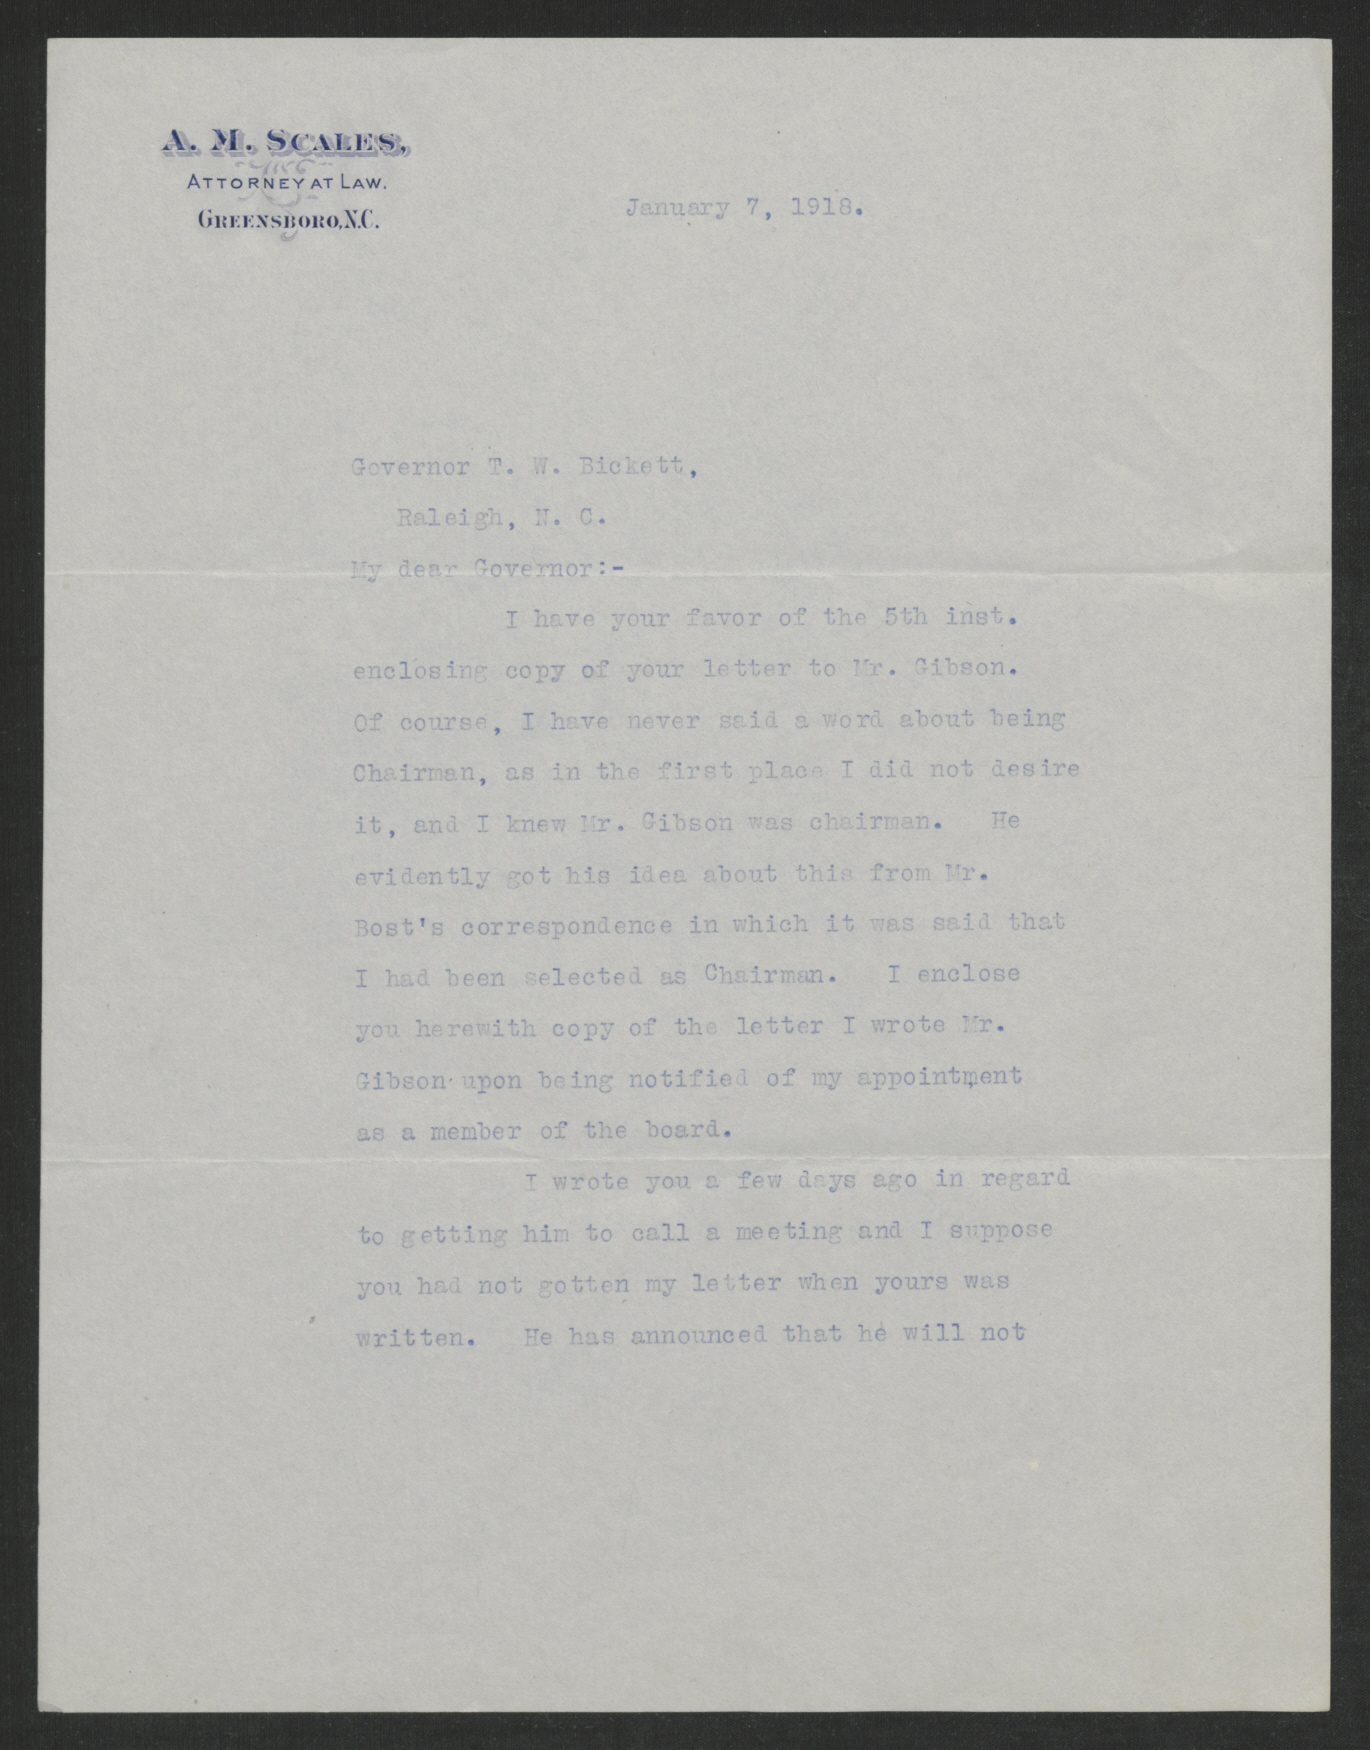 Letter from Alfred M. Scales to Thomas W. Bickett, January 7, 1918, page 1